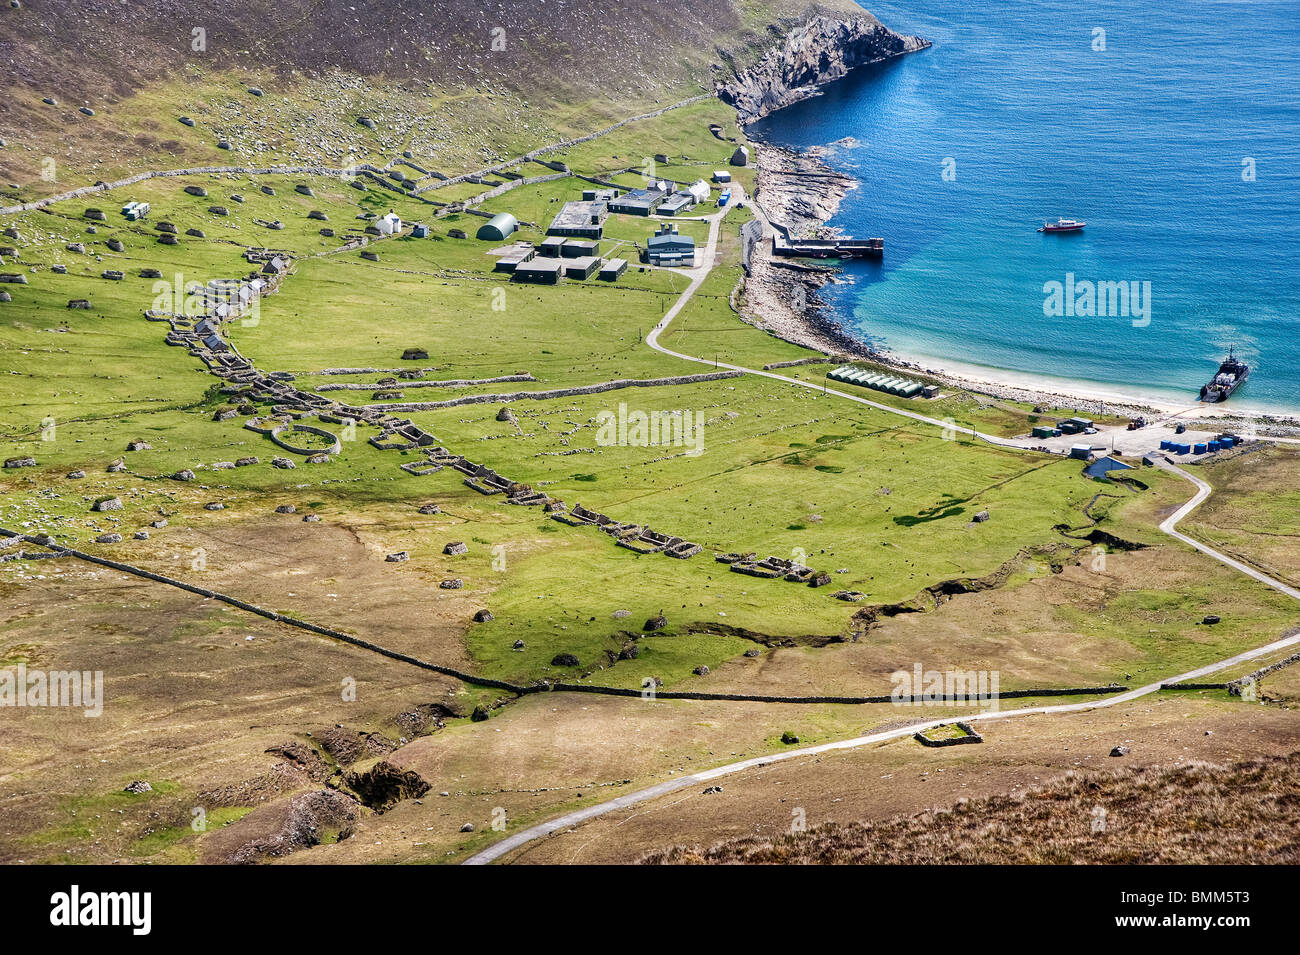 A view of Village Bay St. Kilda from the top of Ruaival Stock Photo